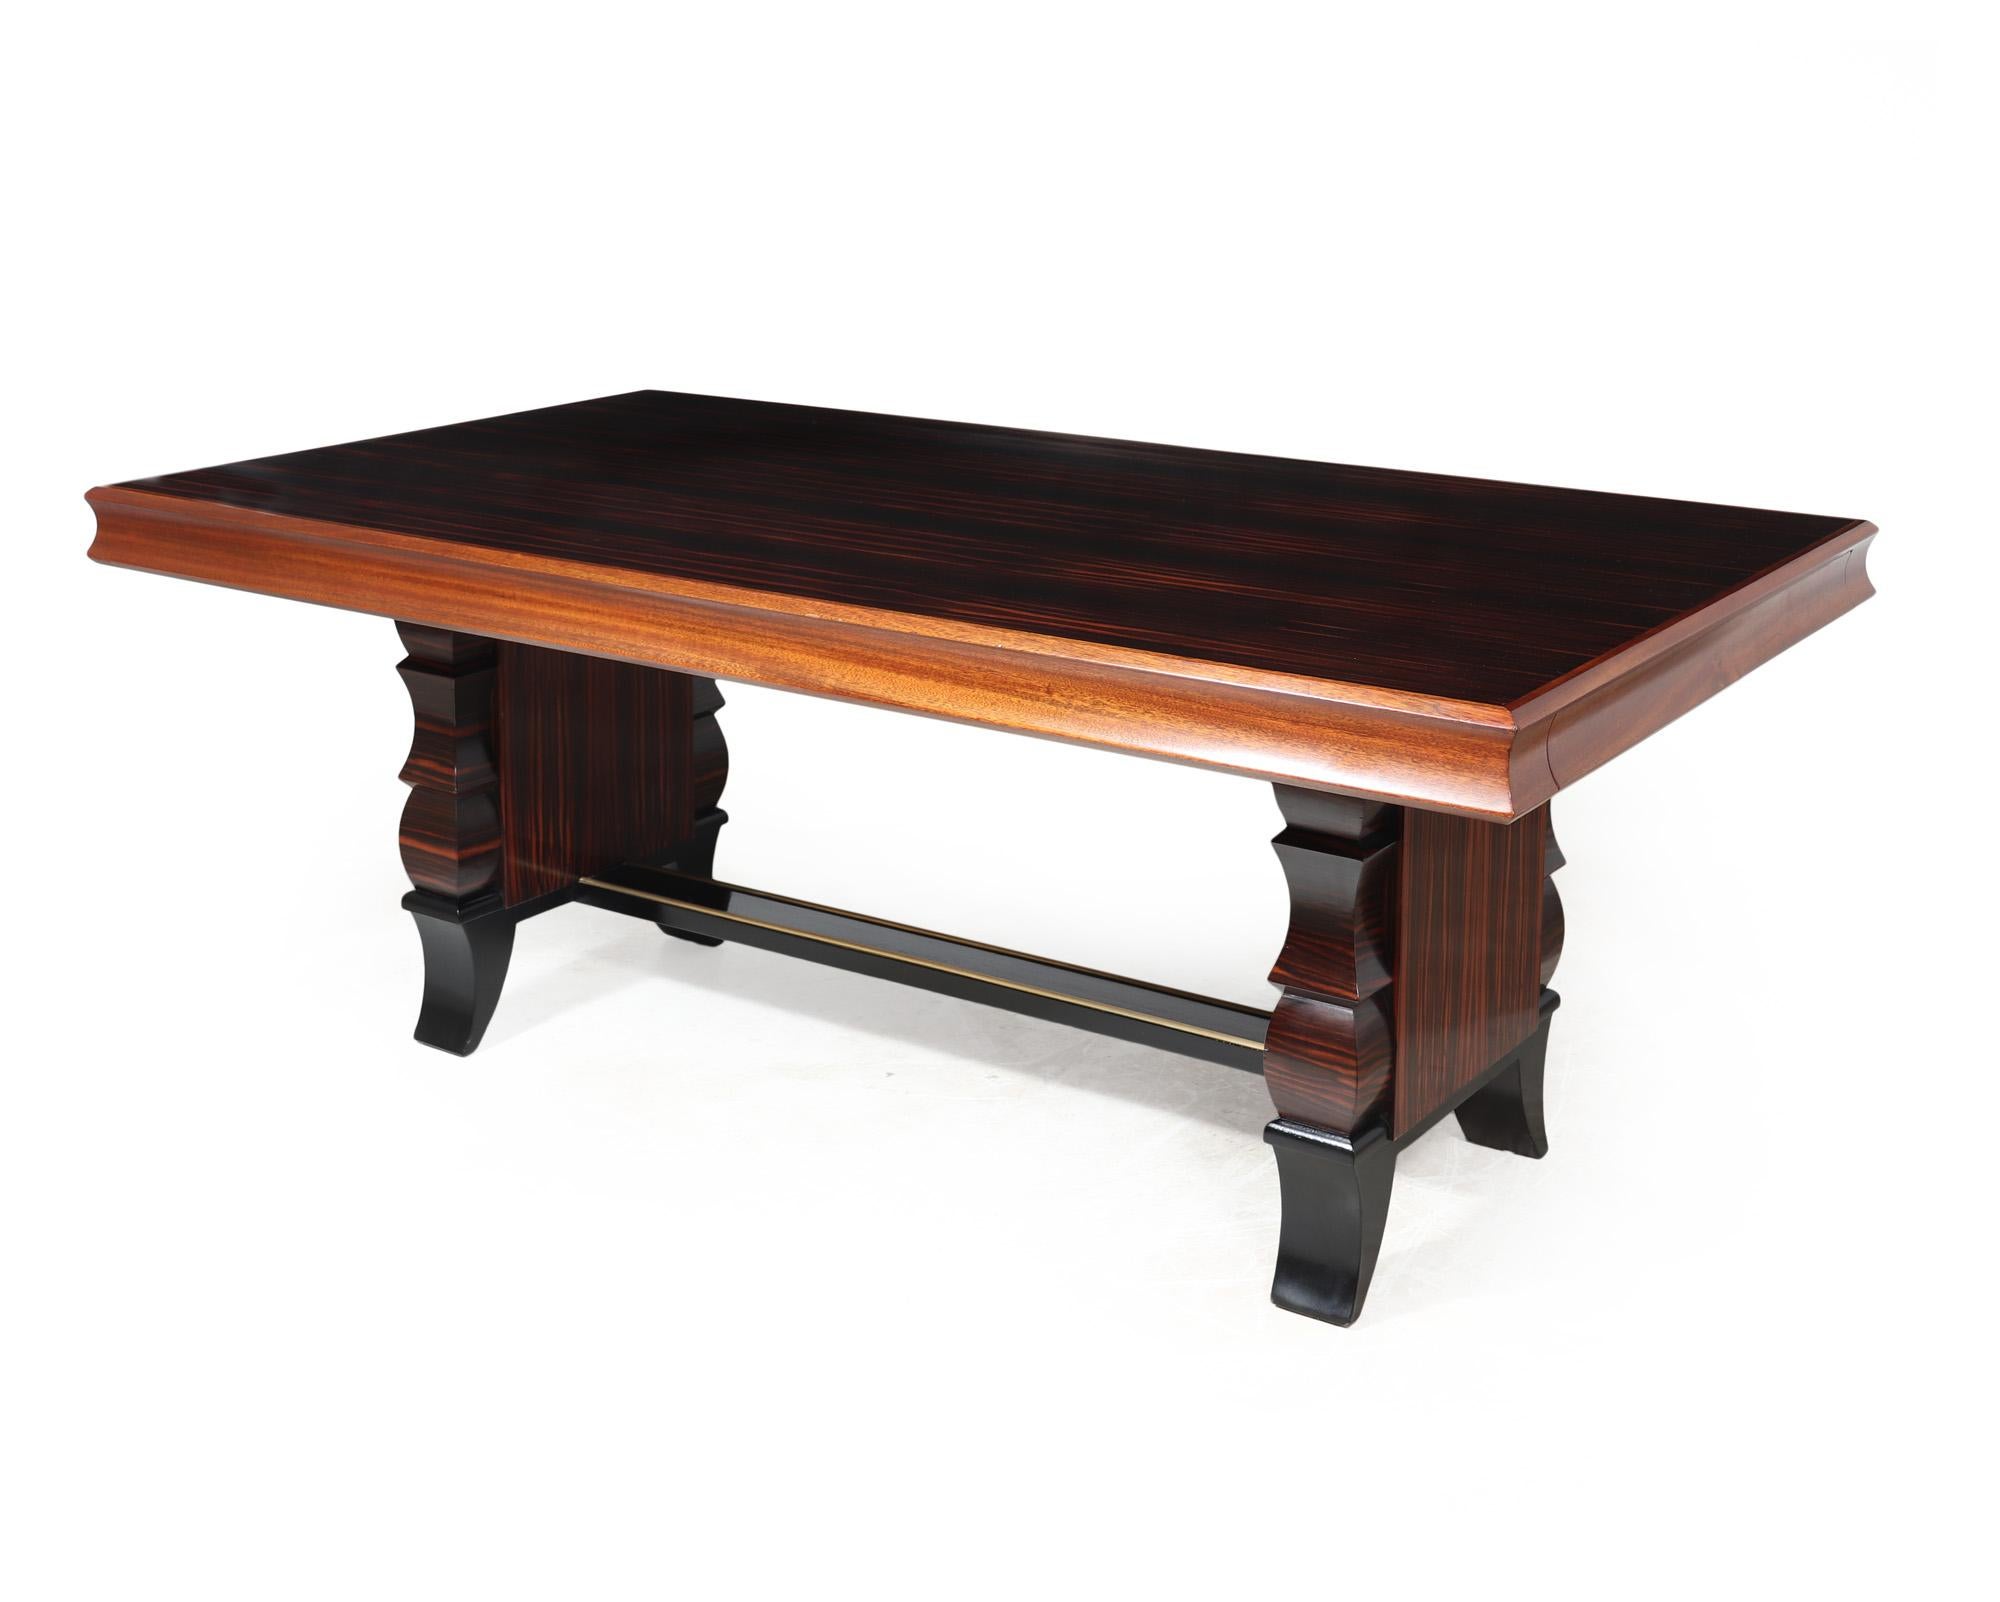 FRENCH ART DECO DINING TABLE 
This elegant French art deco extending dining table was crafted in France during the 1920s, featuring a combination of Macassar ebony and mahogany. Supported by an intricately designed twin pedestal base with brass